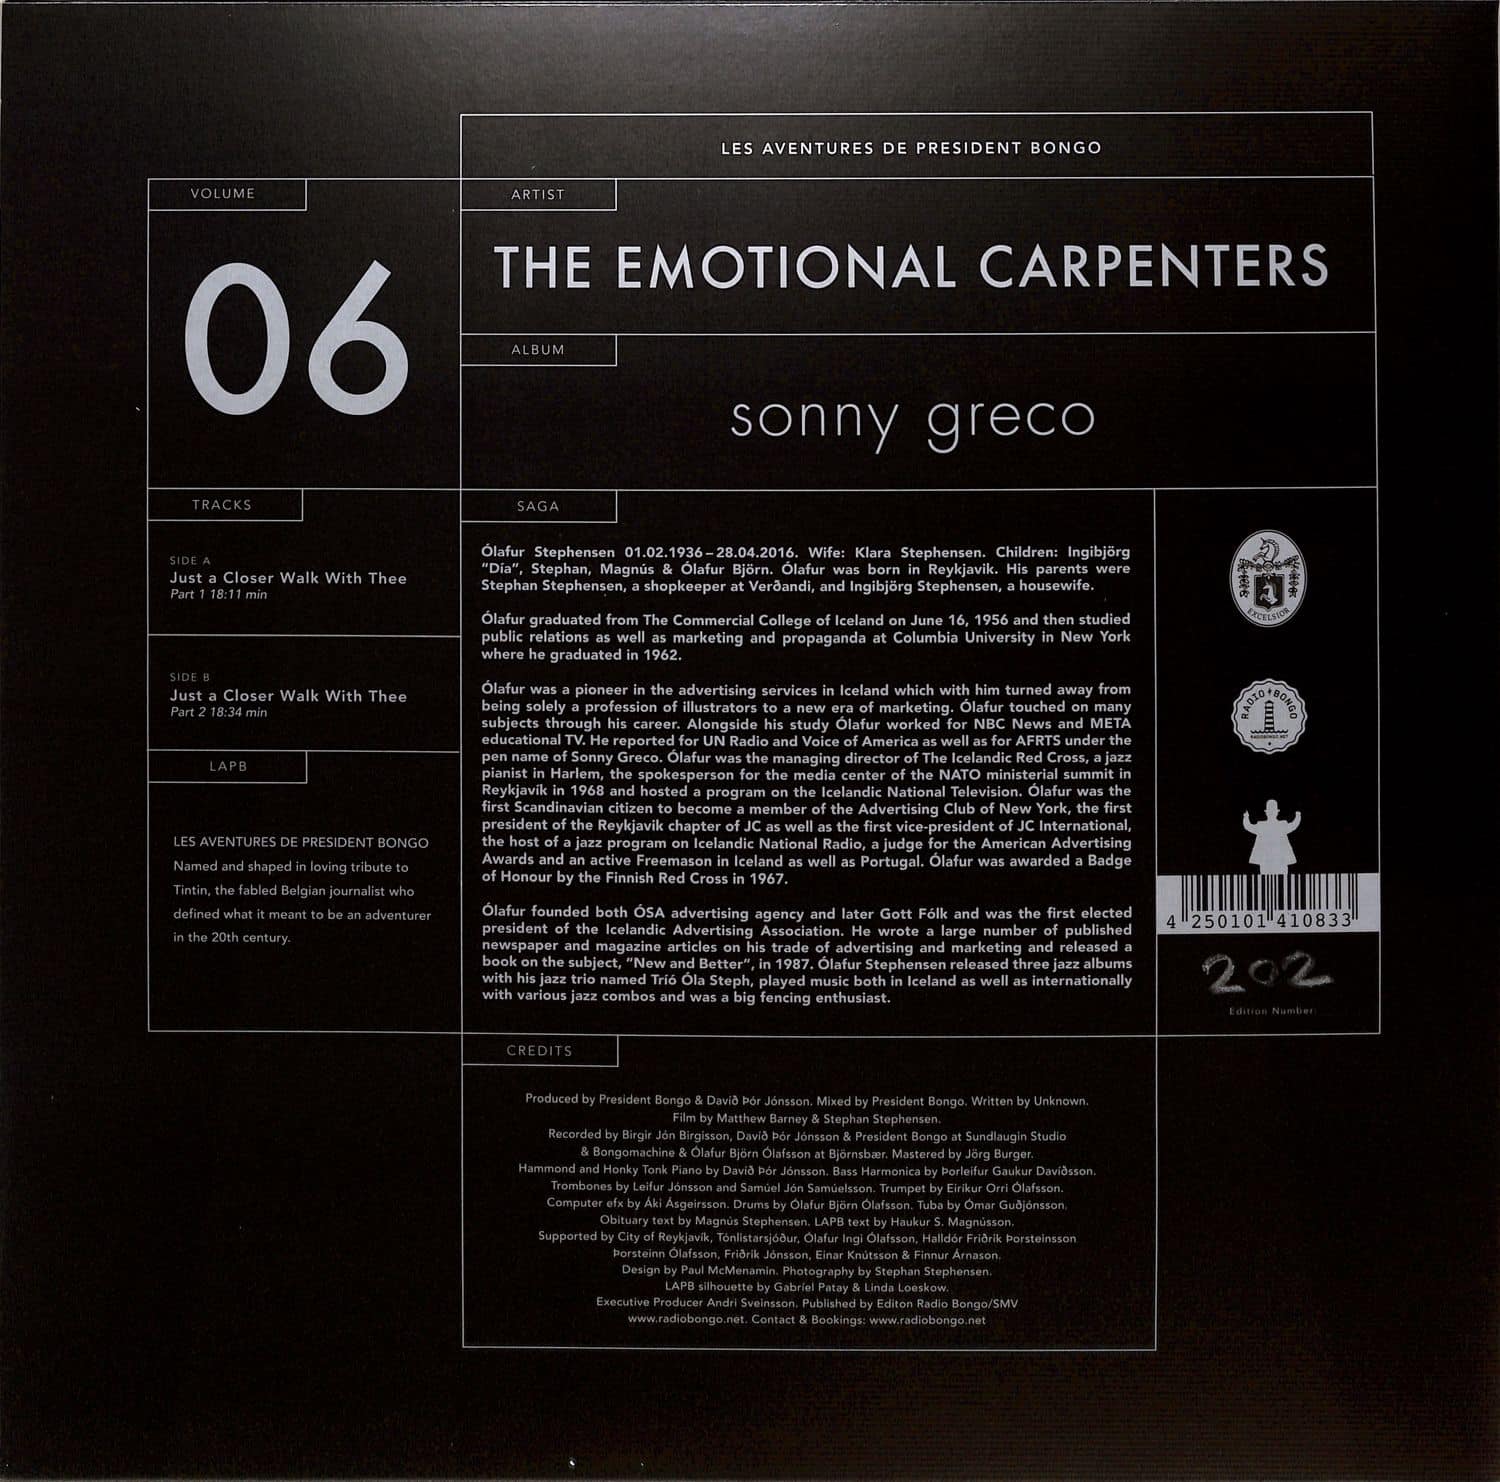 The Emotional Carpenters - JUST A CLOSER WALK WITH THEE PT 1 & 2 